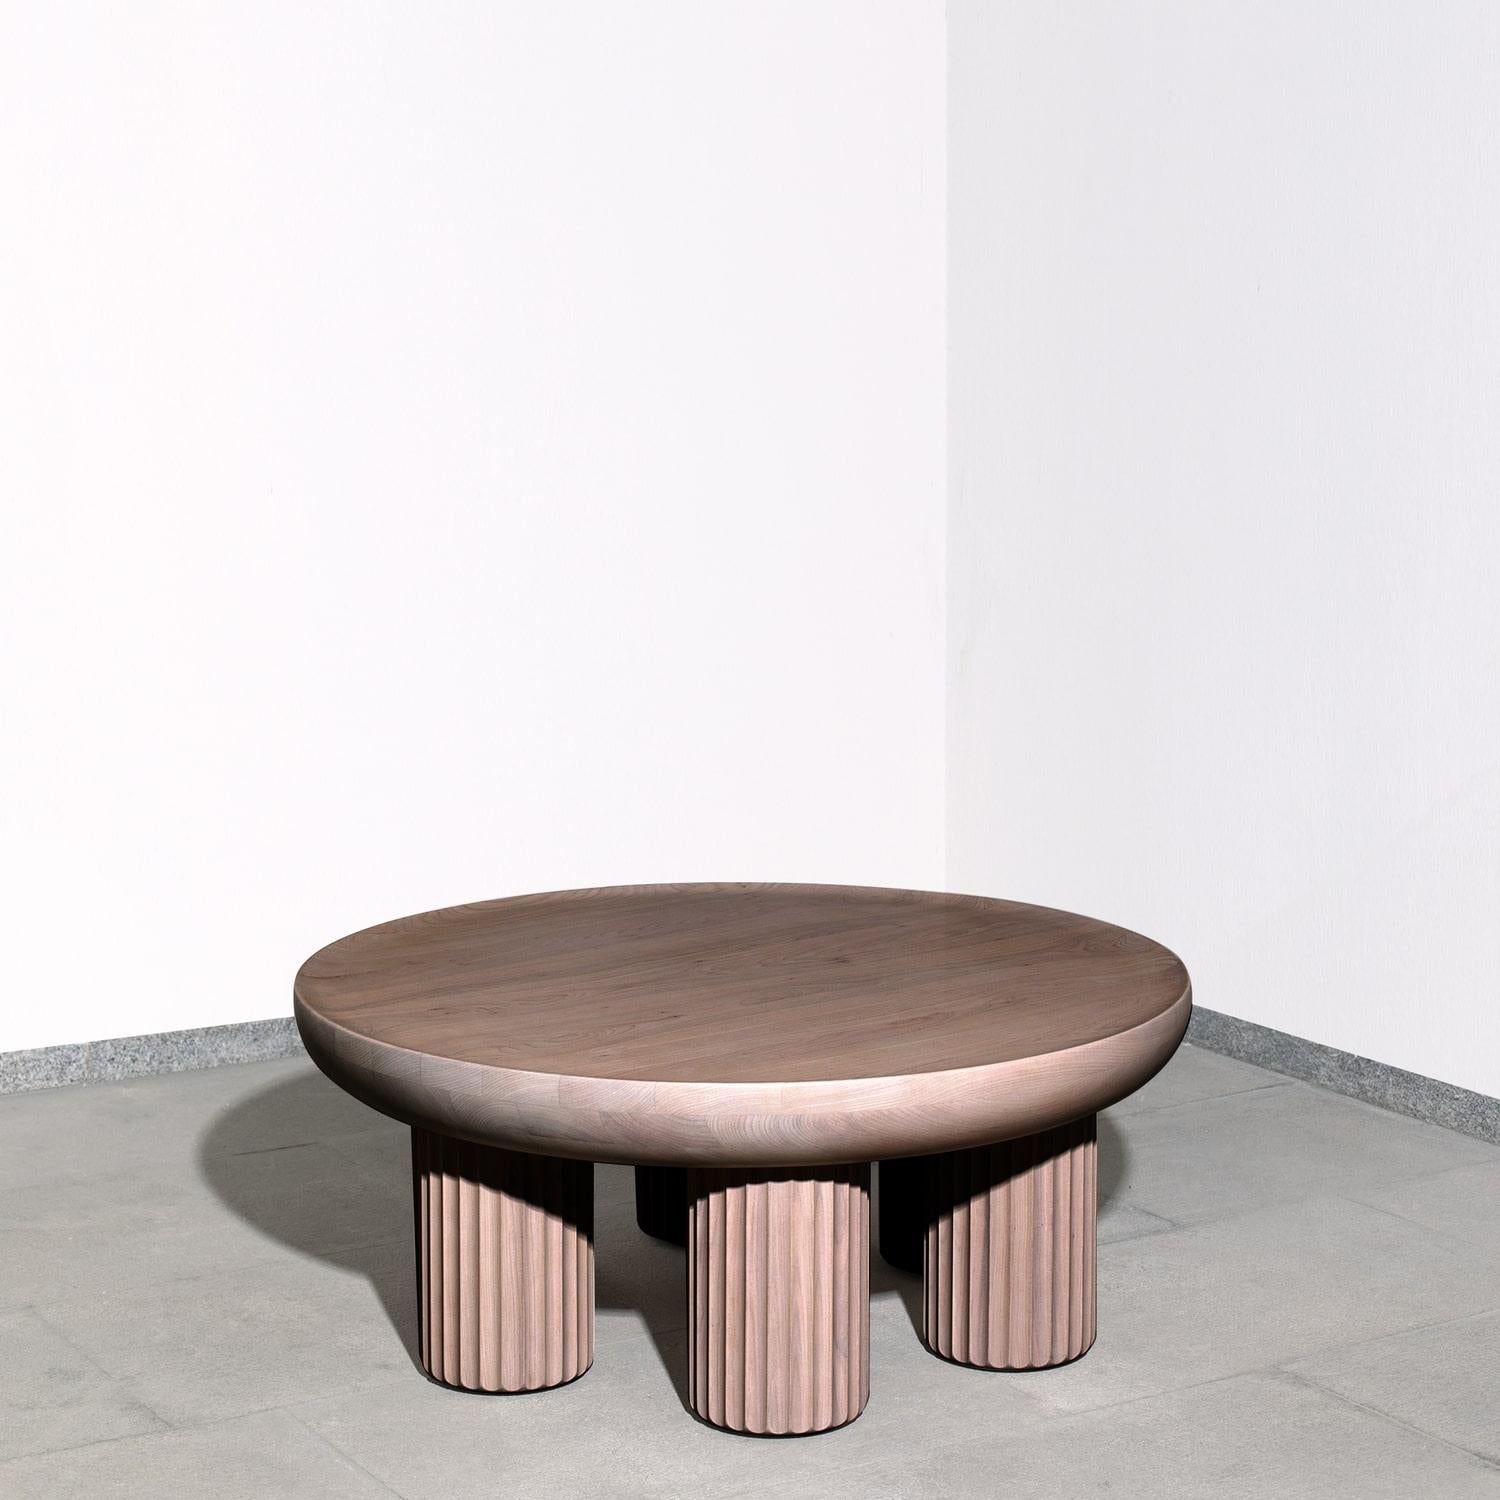 Kalokagathos table by Jiri Krejcirik
Dimensions: 100 x 100 x 42 cm
Materials: solid wood
Also available in pine, cherry, pine and birch.

The tables entitled Odyssey and Kalokagathos represent the dialogue between the aesthetics of ancient